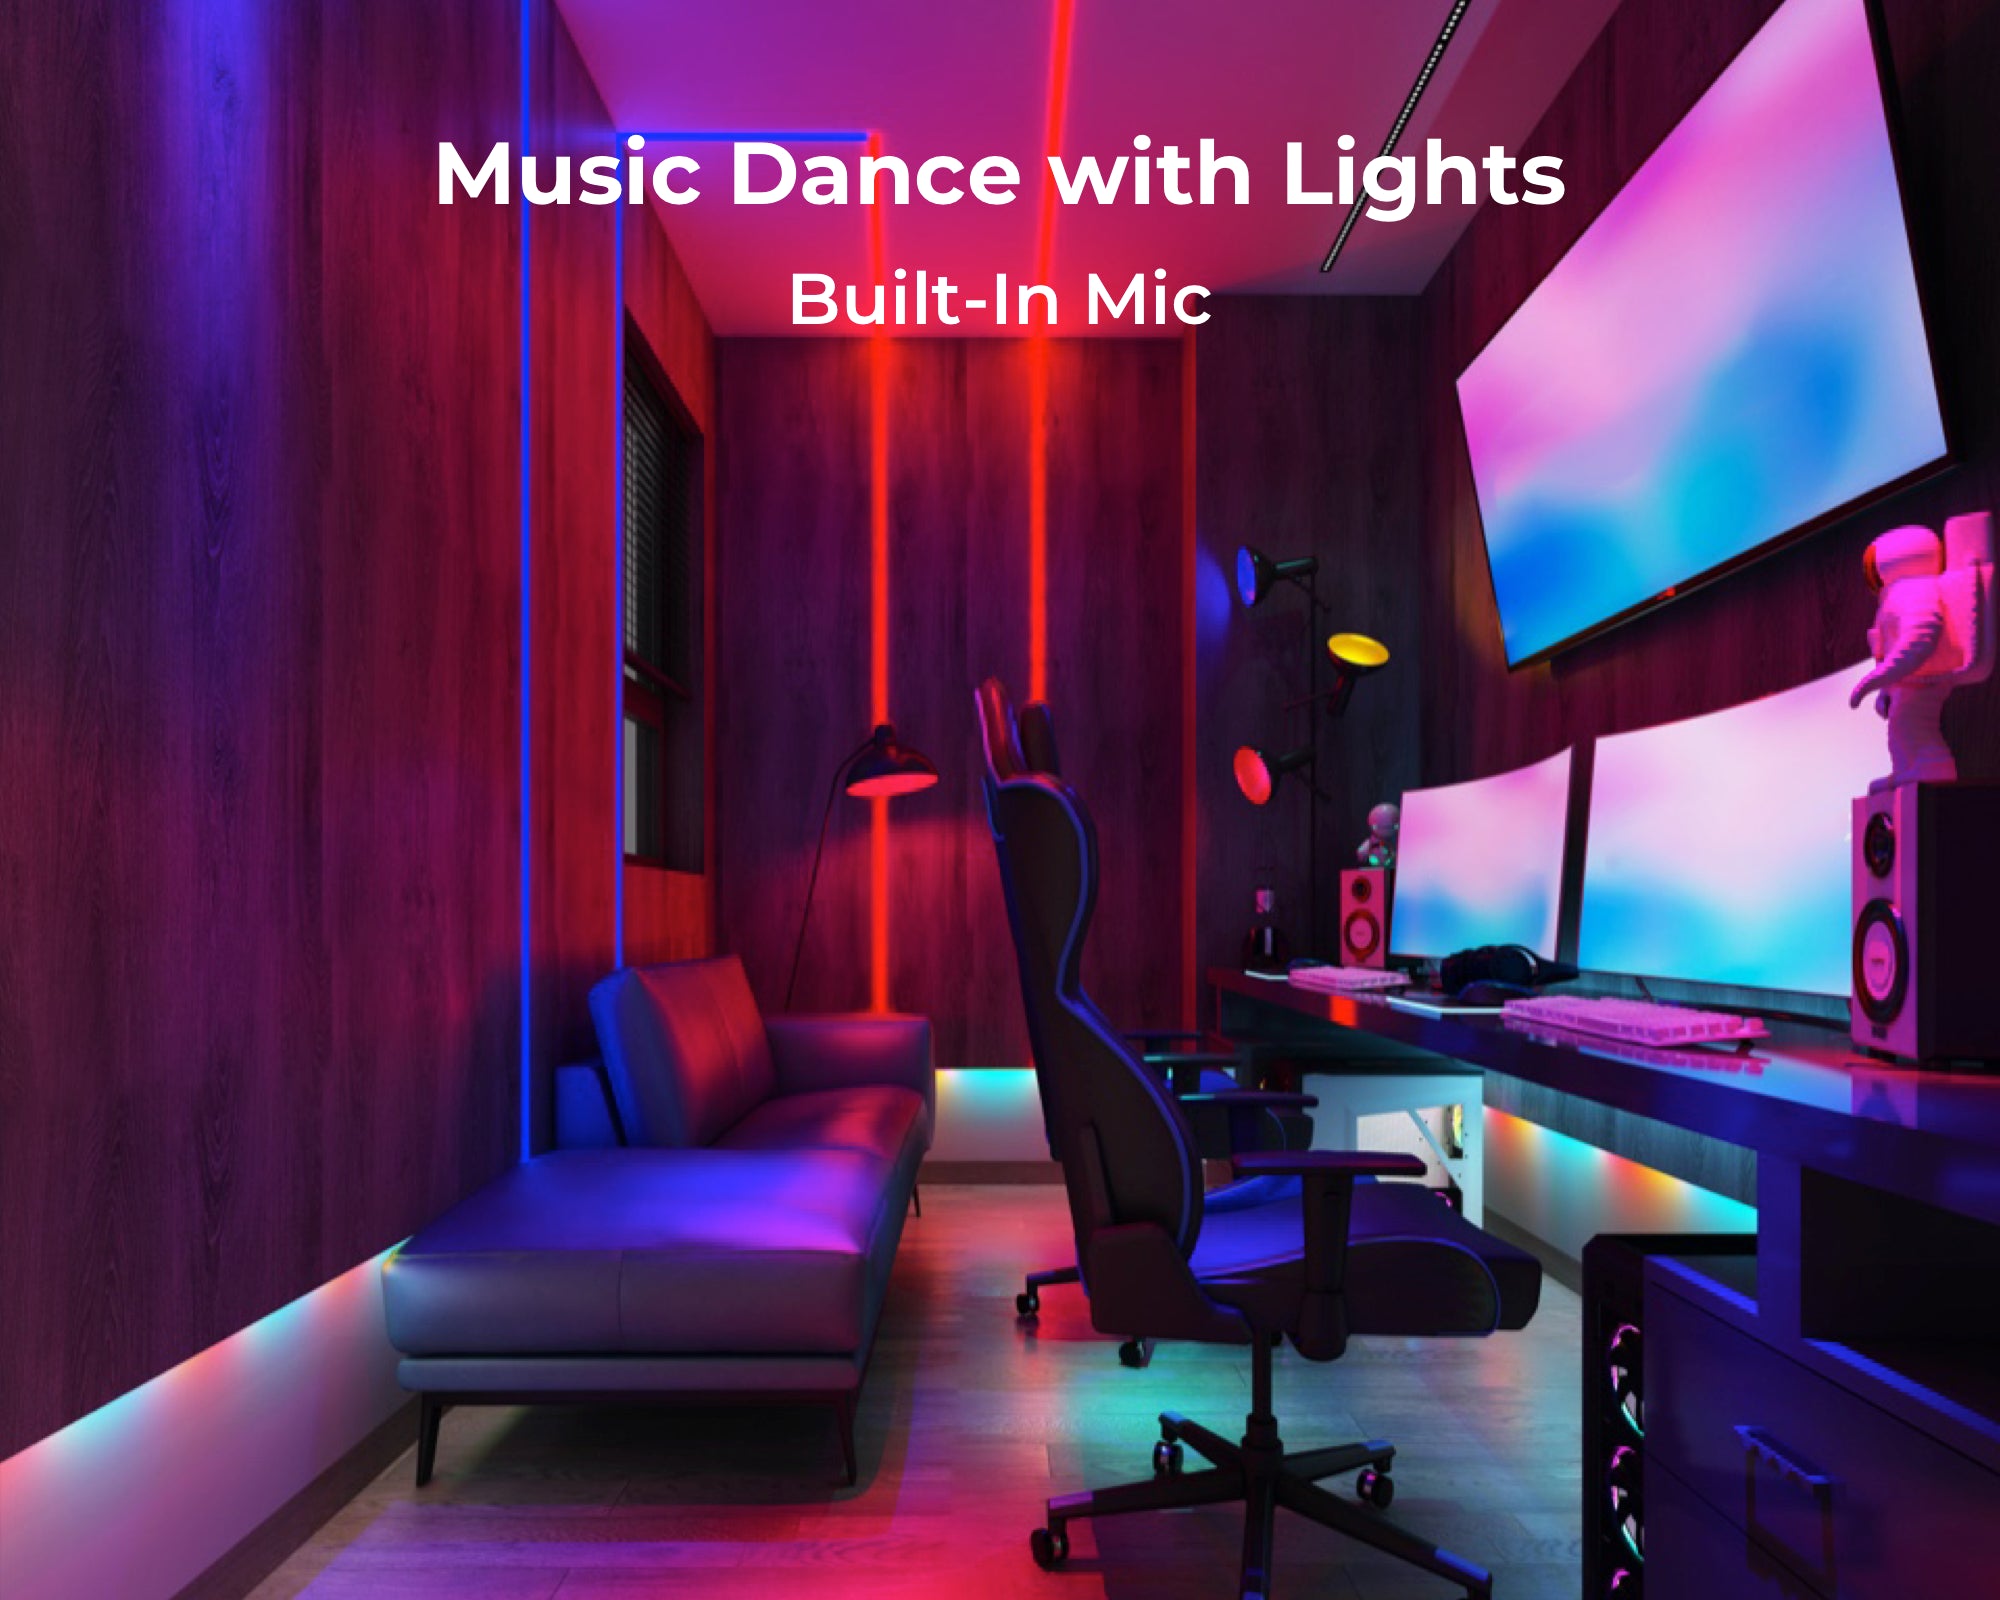 The built-in high-sensitive mic changes with the beat of music or voice. The RGB light strip boasts 60 LED light beads per 3.3 ft whose performance is way smoother than ordinary light strips with 24 or 30 beads.